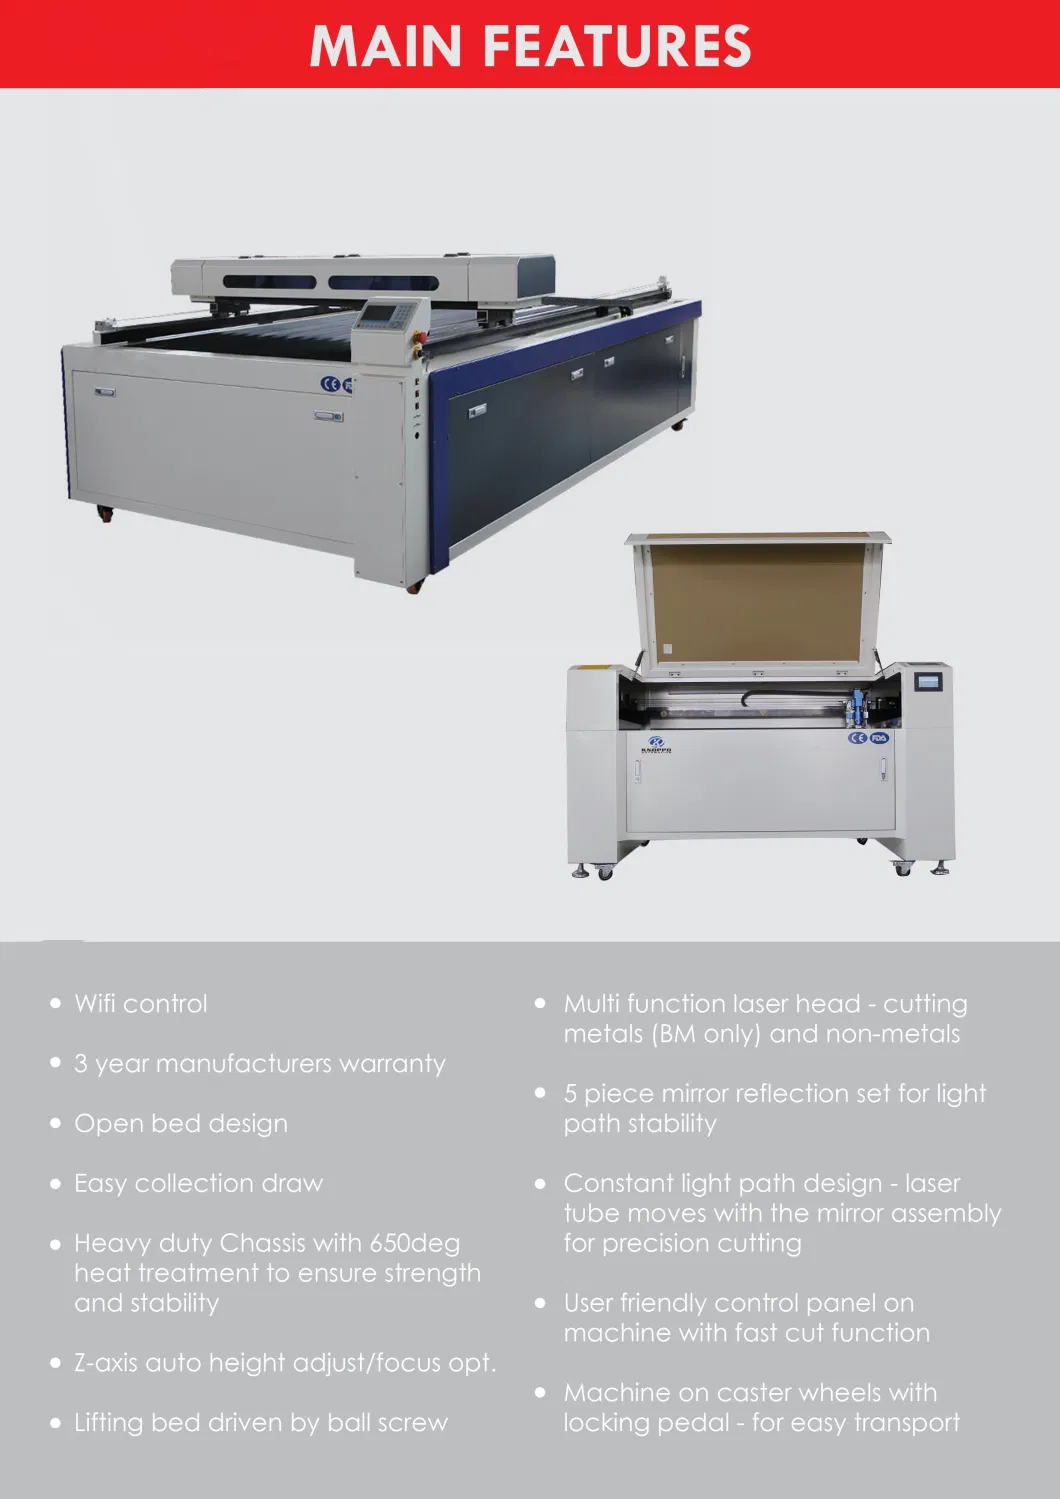 1325 Reci 80W 100W 130W 150W 180W 300W Mixed CO2 Laser Engraving Cutting Machine for Acrylic Wood Leather MDF Wood Metal and Nonmetal Materials